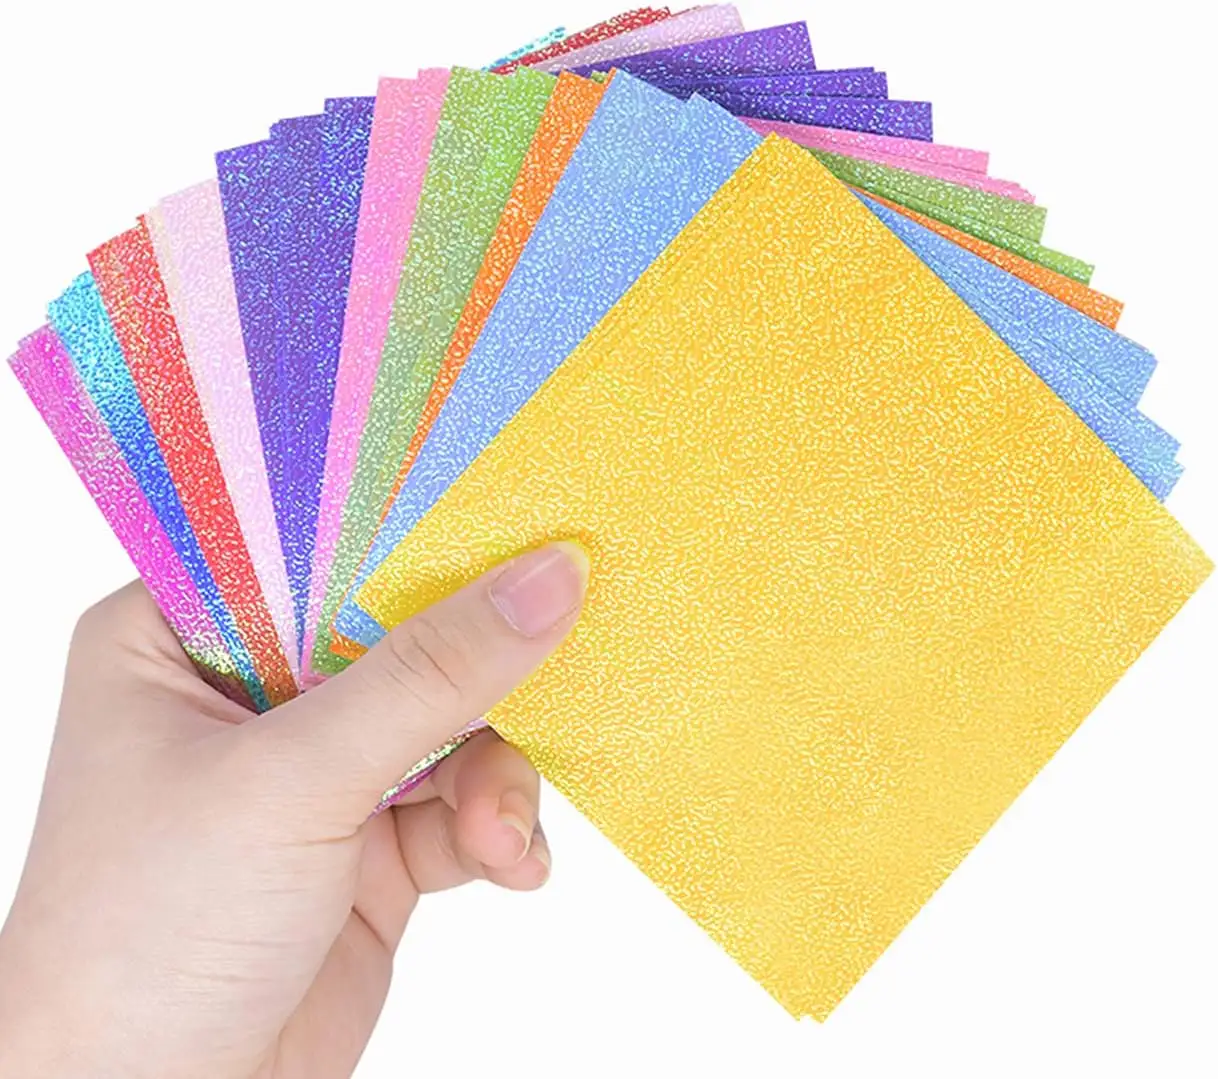 Factory Glitter Origami Paper, Colored Origami Sparkly Paper Premium Craft Origami for DIY Puncher Gift Box Wrapping